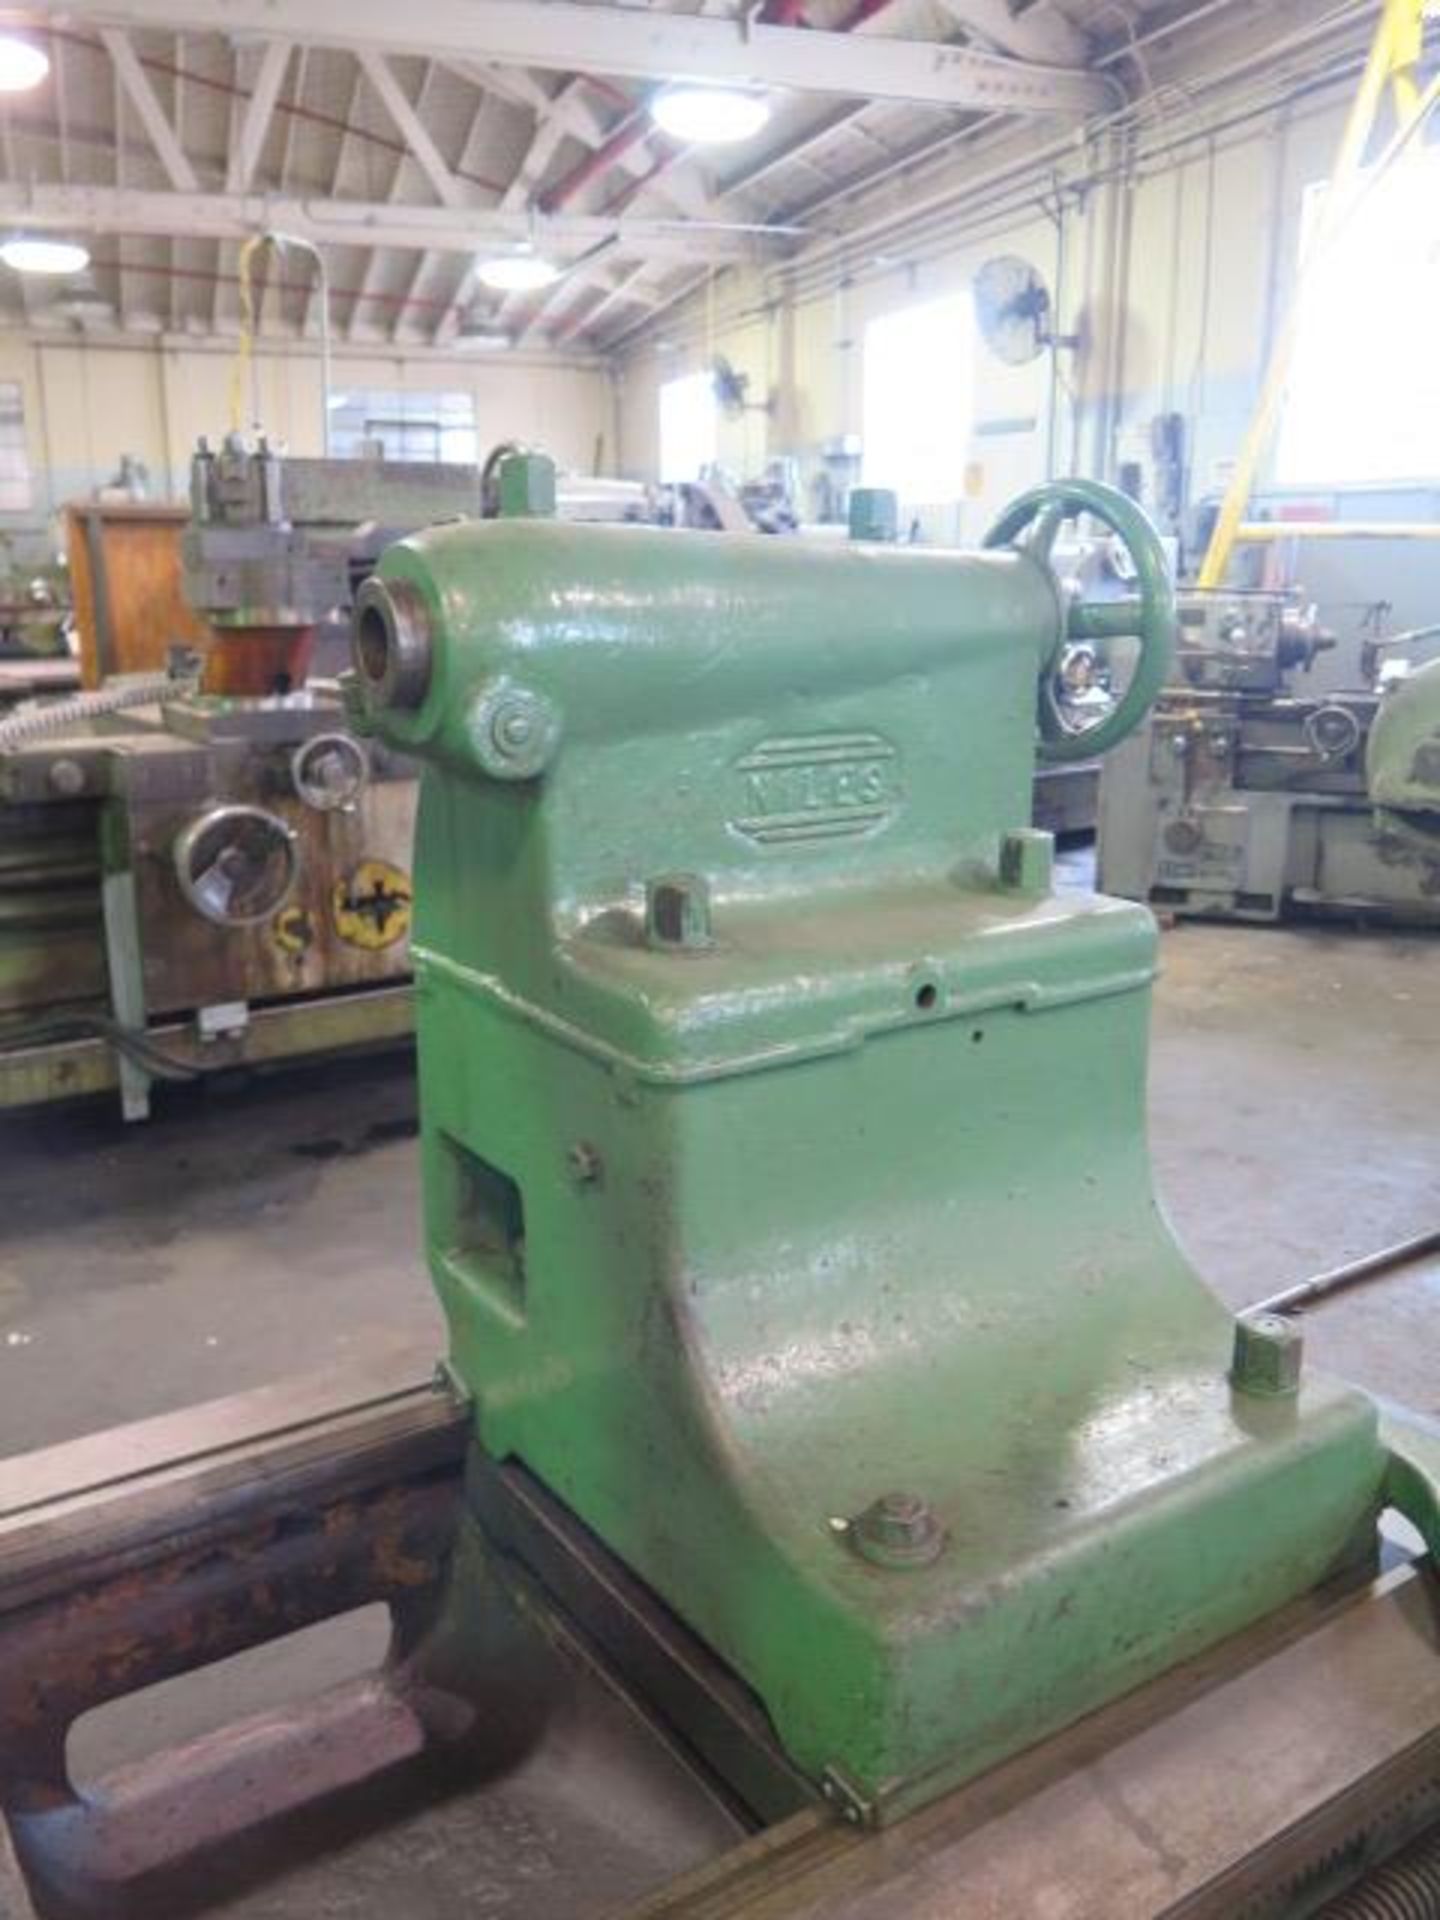 Niles A54P 62” x 140” Lathe s/n 23579 w/ 3.94-232 RPM, Inch Threading, Steady Rest, SOLD AS IS - Image 17 of 20